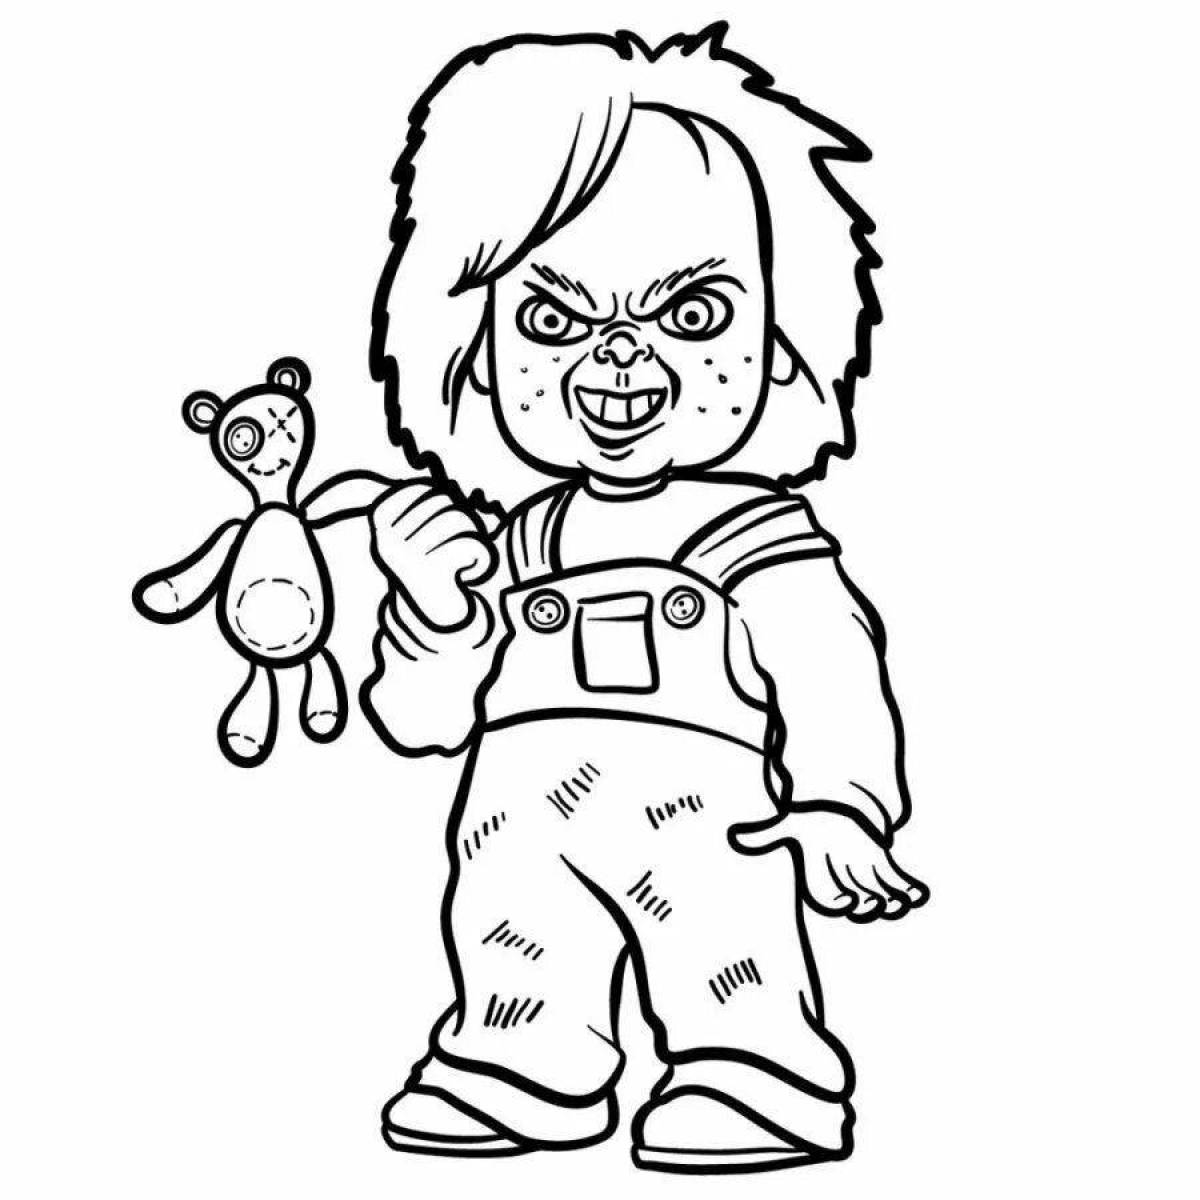 Exciting chucky doll coloring book